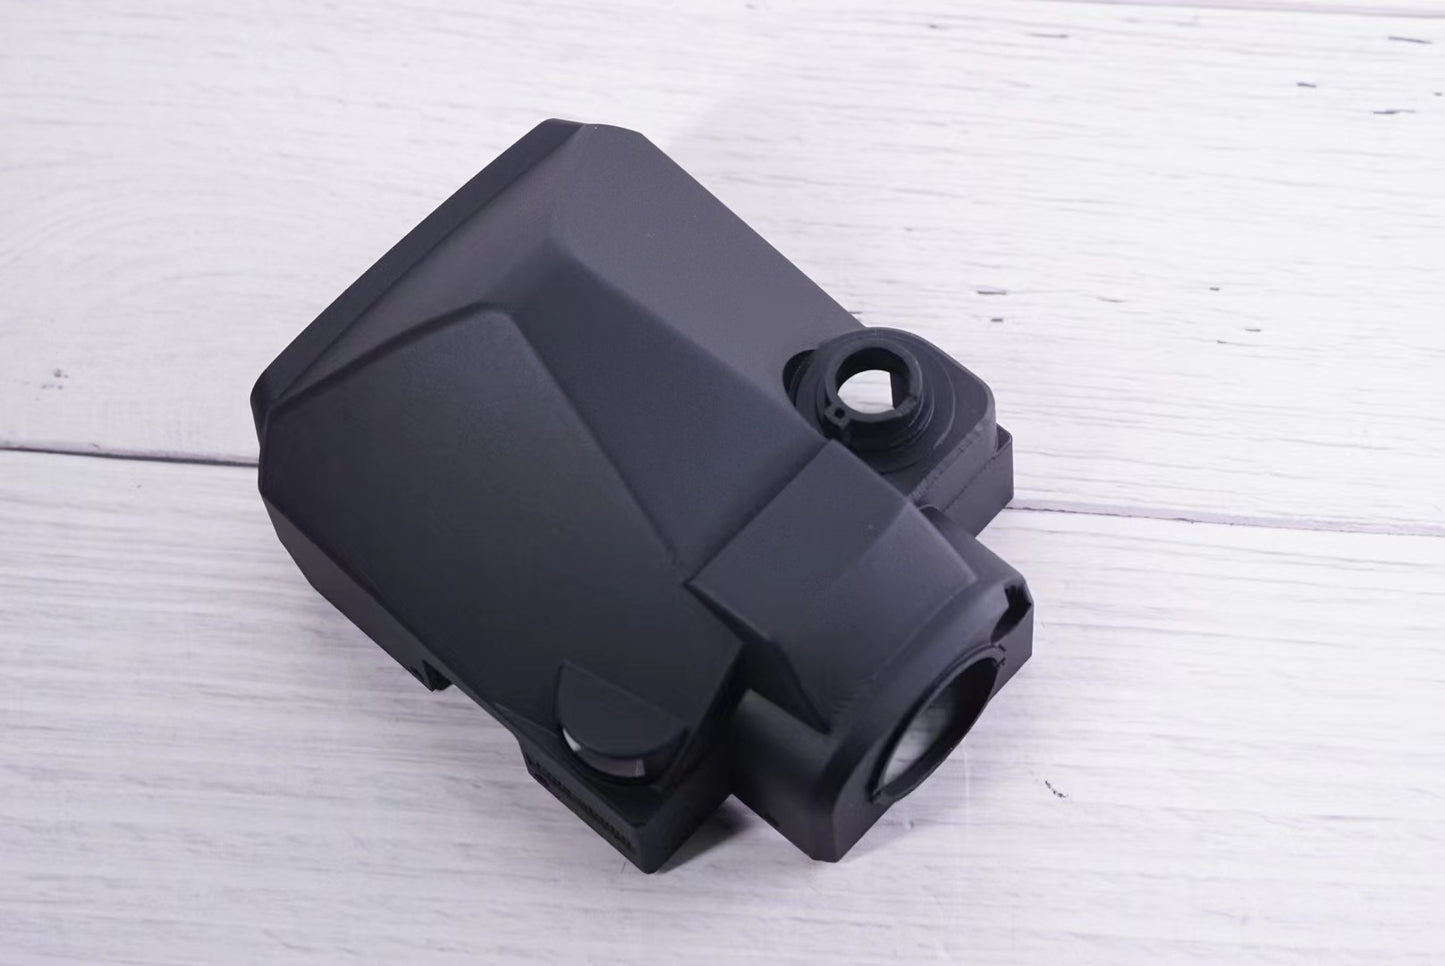 PENTAX 67II VIEWFINDER SHELL/HOUSING Replace Parts ACCESSTORY